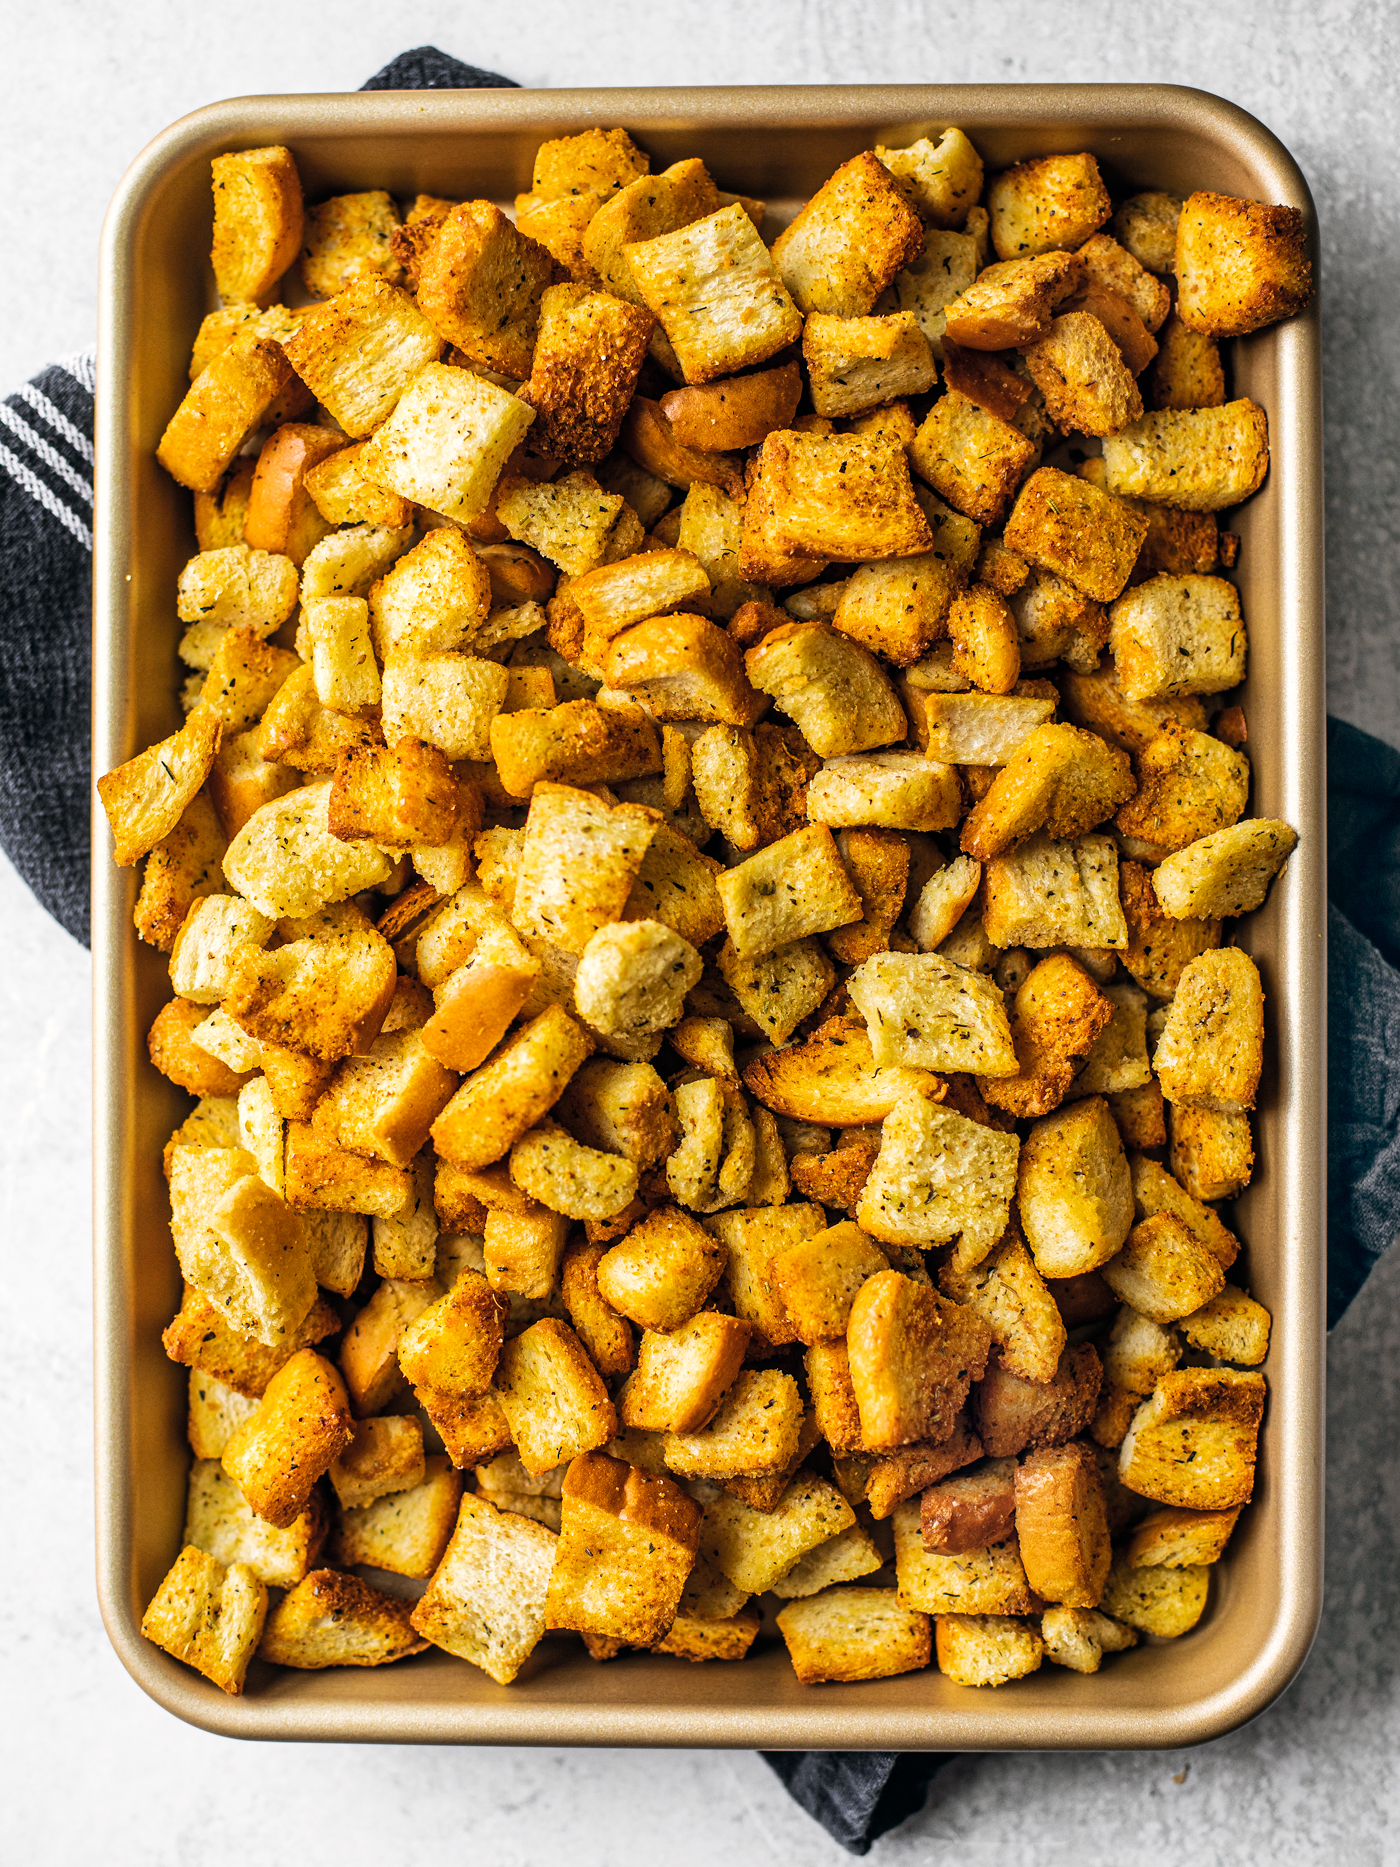 Baking sheet with golden homemade croutons on it.